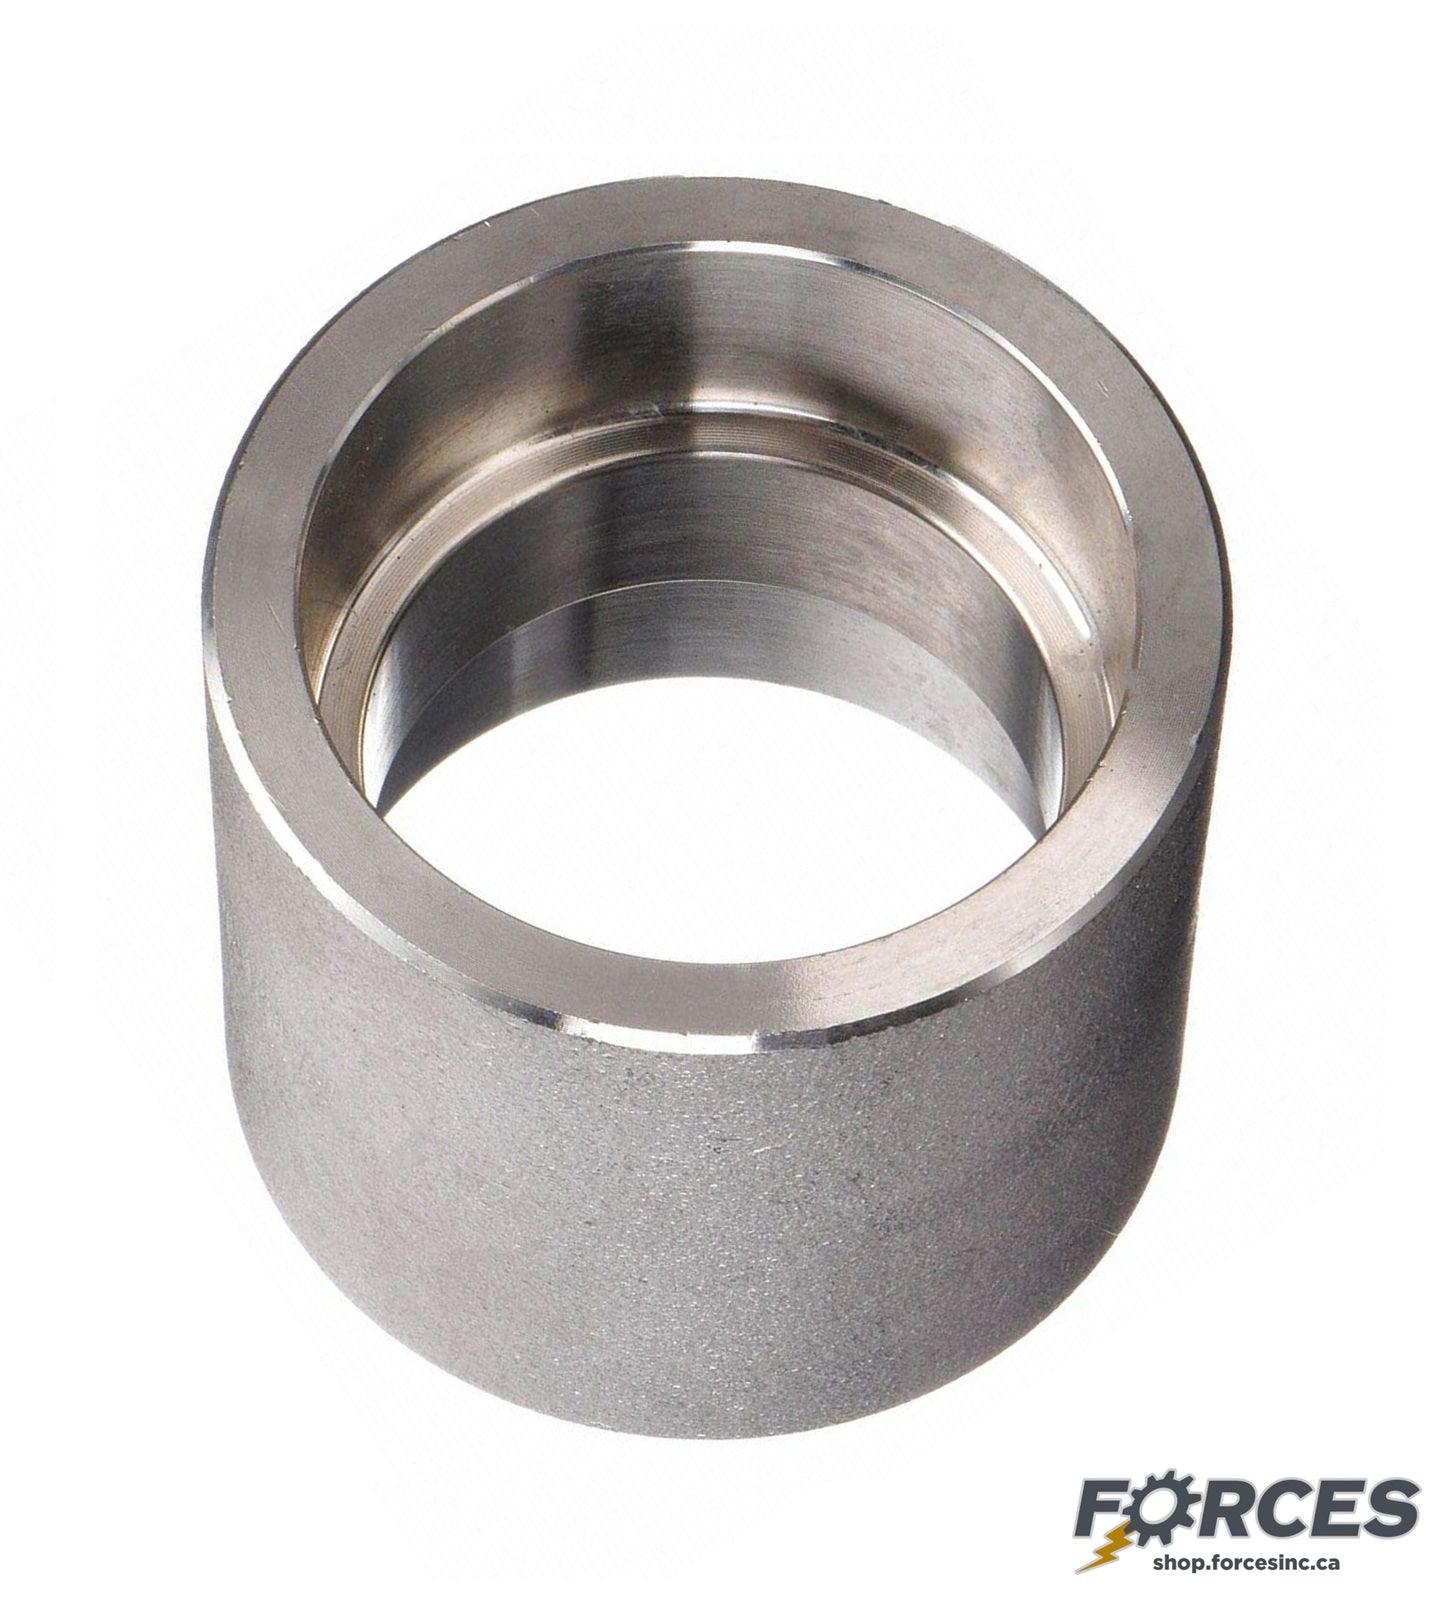 1/2" Coupling Socket Weld #150 - Stainless Steel 304 - Forces Inc